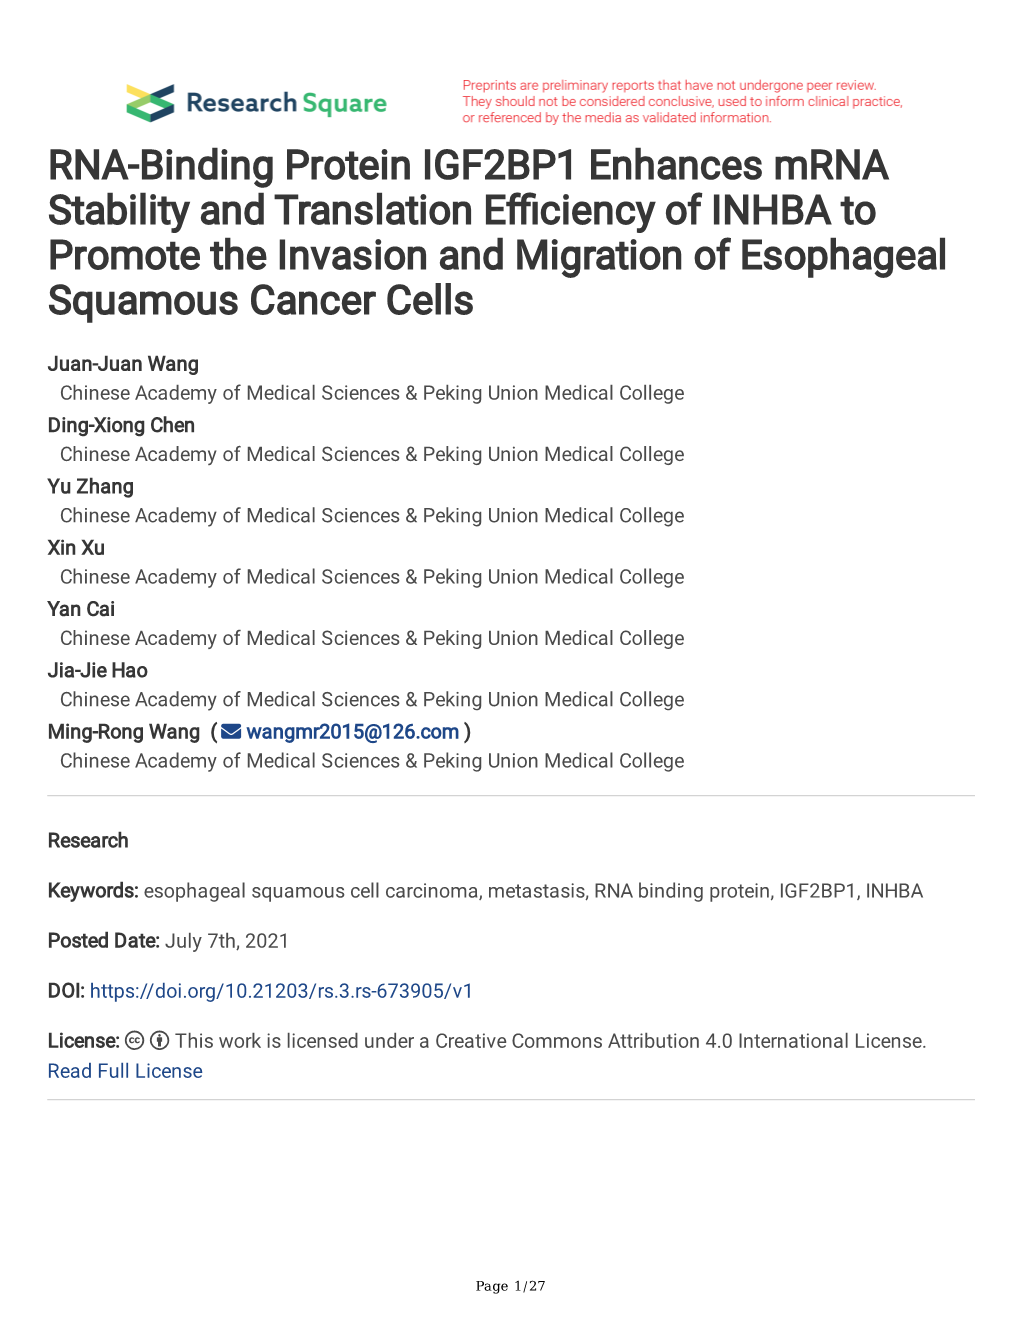 RNA-Binding Protein IGF2BP1 Enhances Mrna Stability and Translation Efciency of INHBA to Promote the Invasion and Migration of Esophageal Squamous Cancer Cells